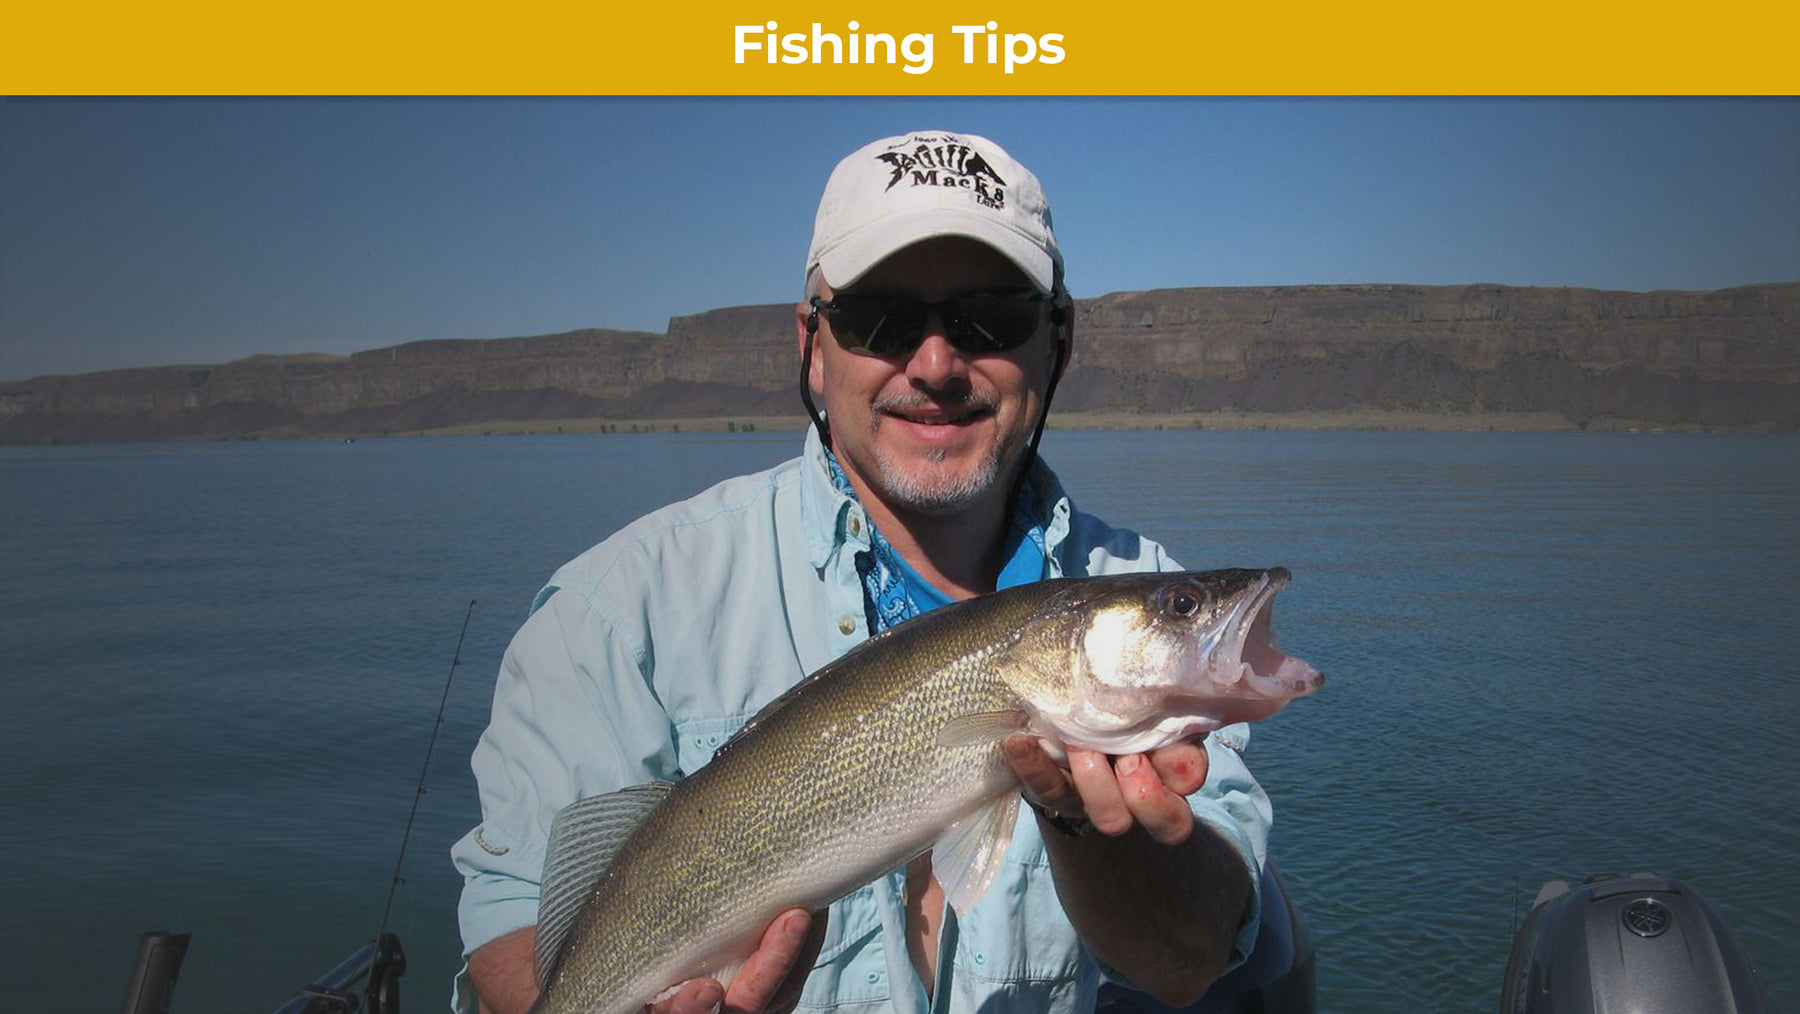 Expert Tip: Add a Smile Blade to your Crankbait to Attract More Fish